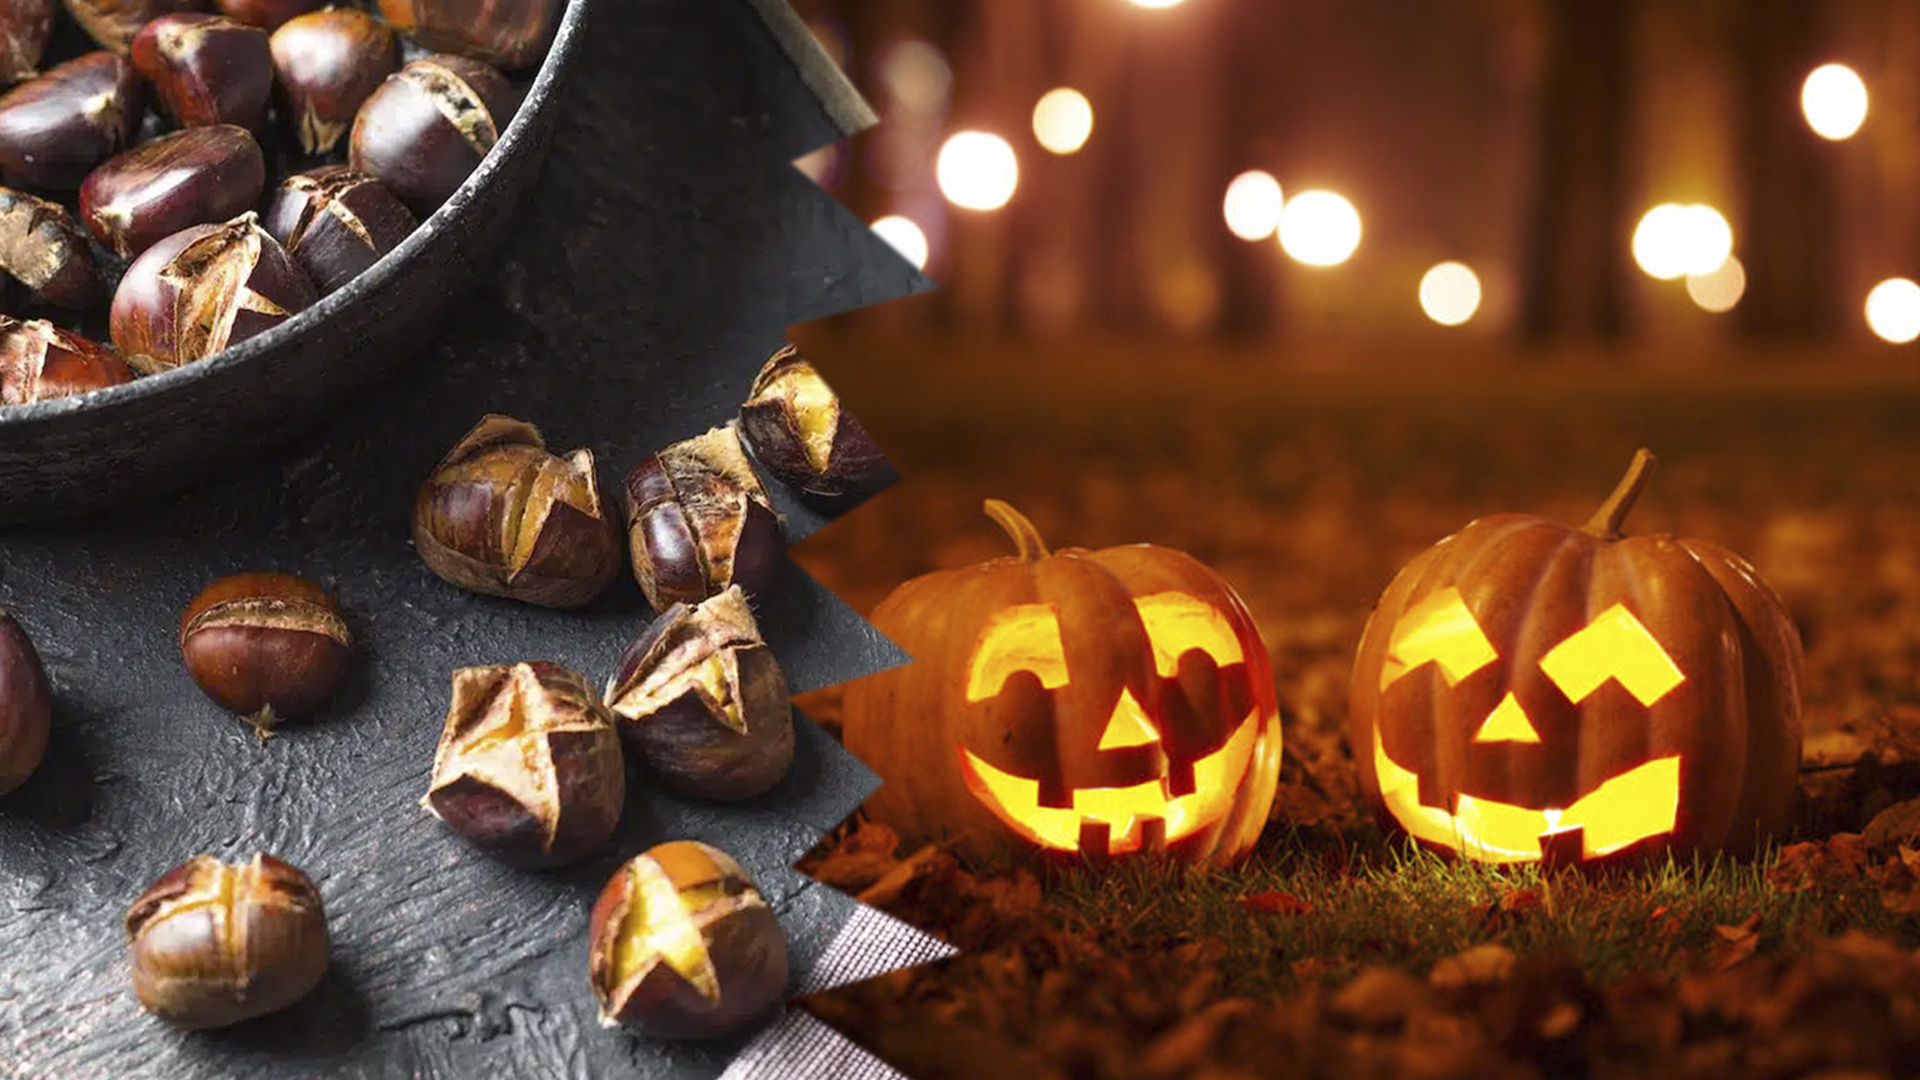 Tosantos and Halloween: Two Different Traditions or One?